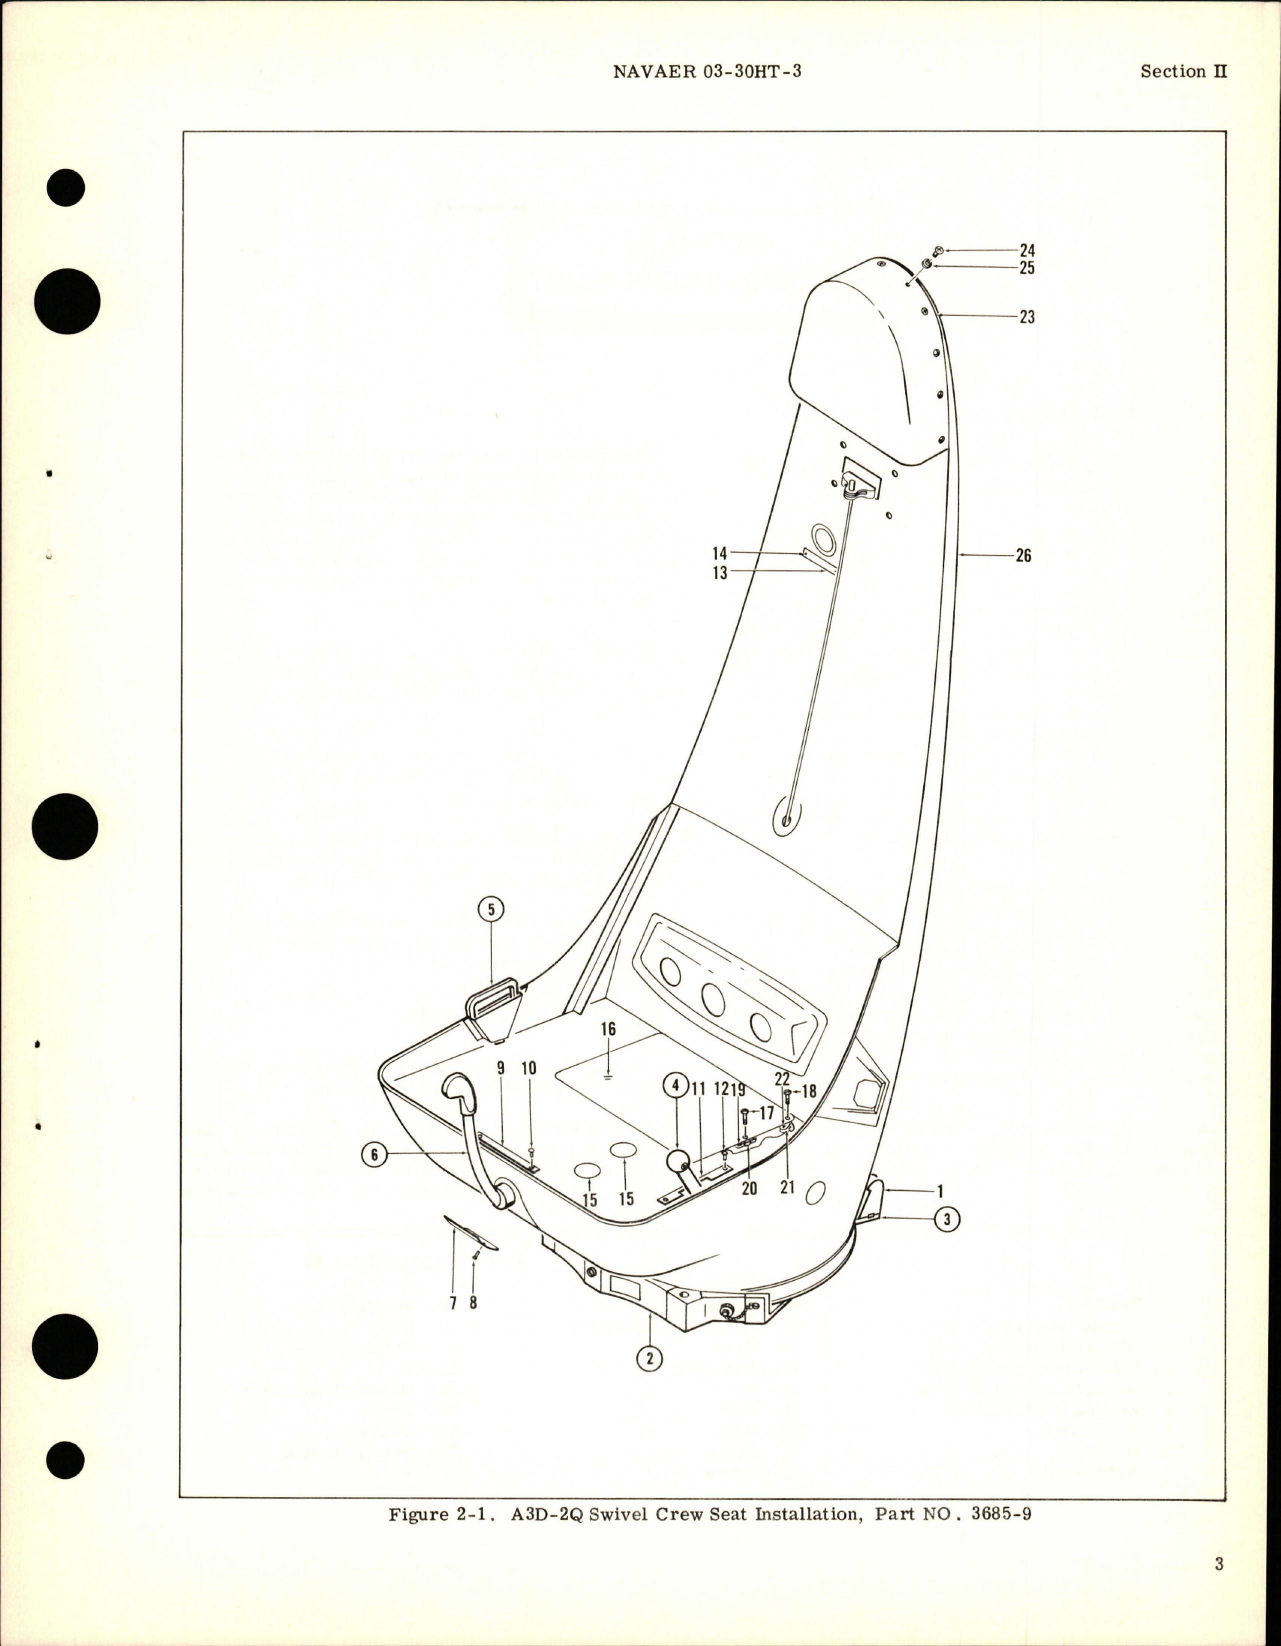 Sample page 7 from AirCorps Library document: Overhaul Instructions for Swivel Crew Seat - A3D-2Q - Part 3685-9